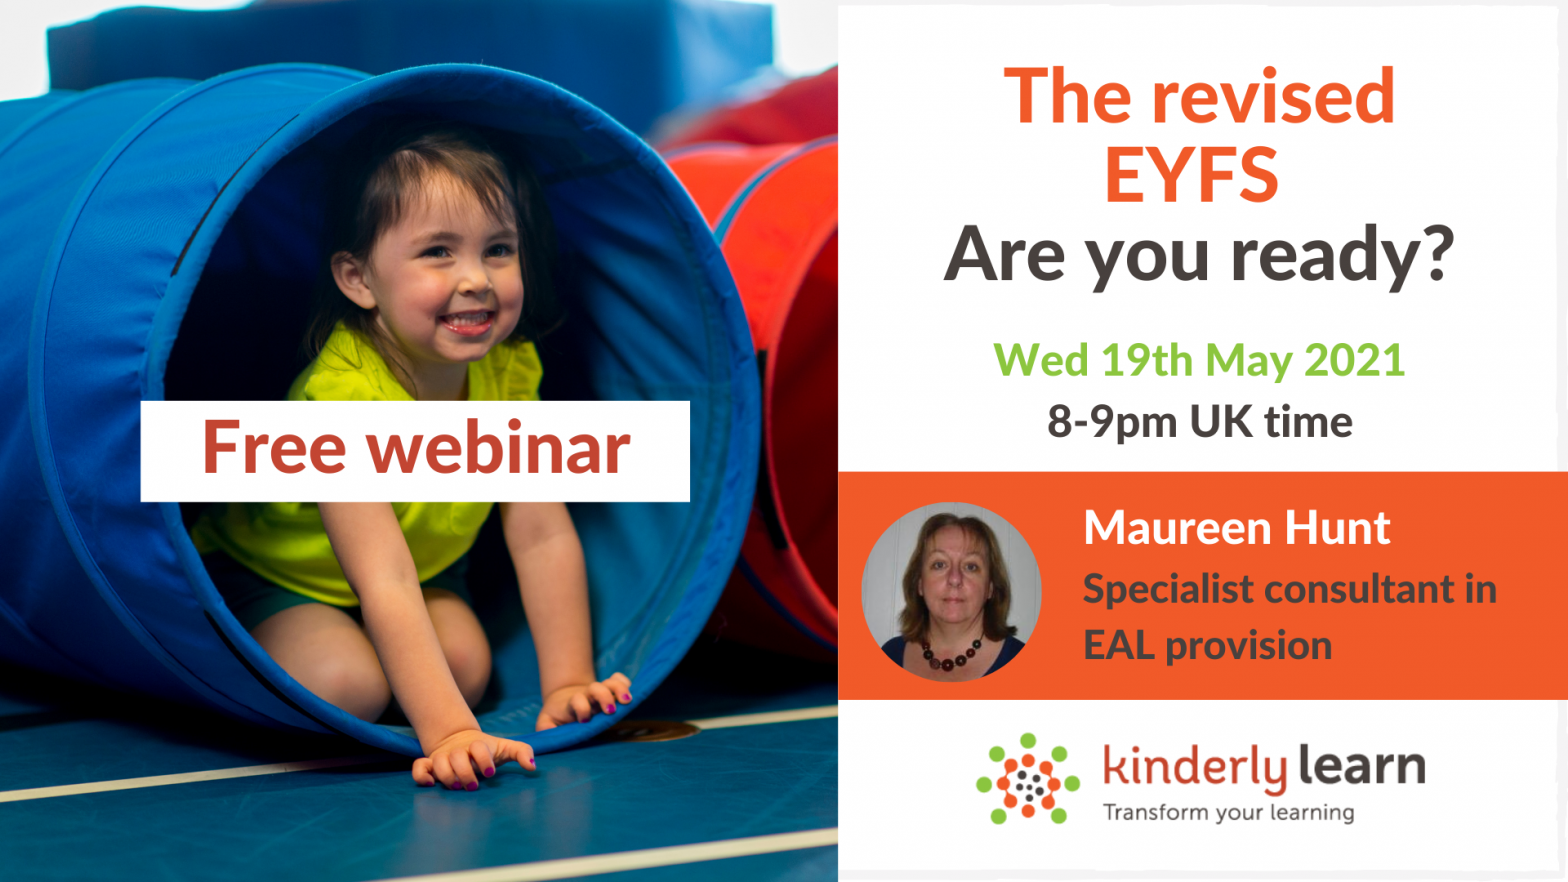 The revised EYFS 2021 - Are you ready? Free webinar - Kinderly